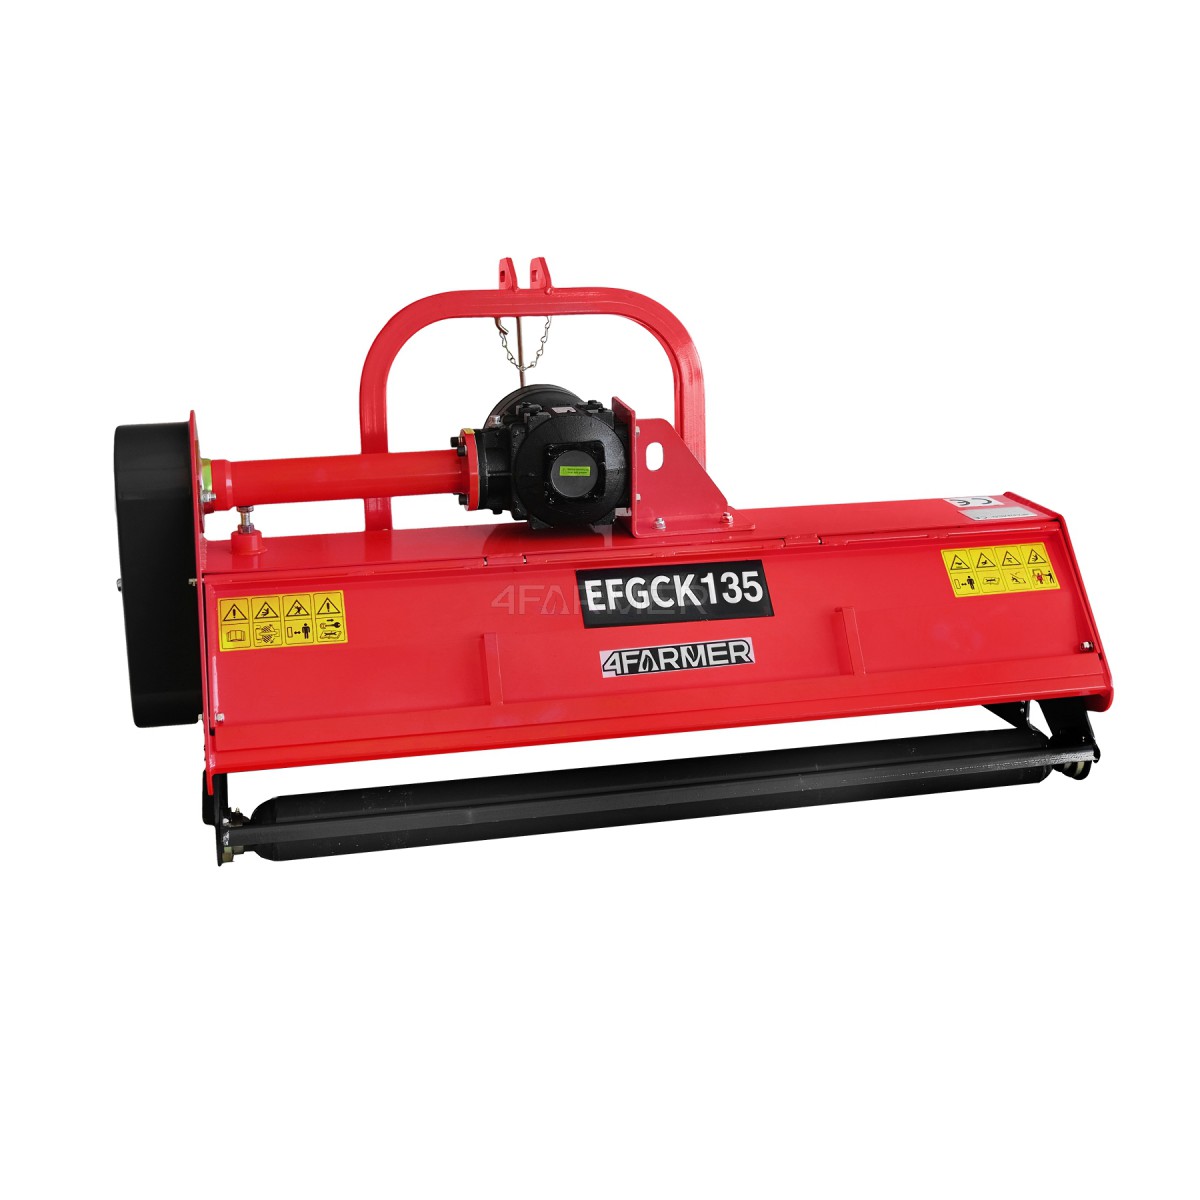 Flail mower EFGC-K 135, opening 4FARMER hatch - red